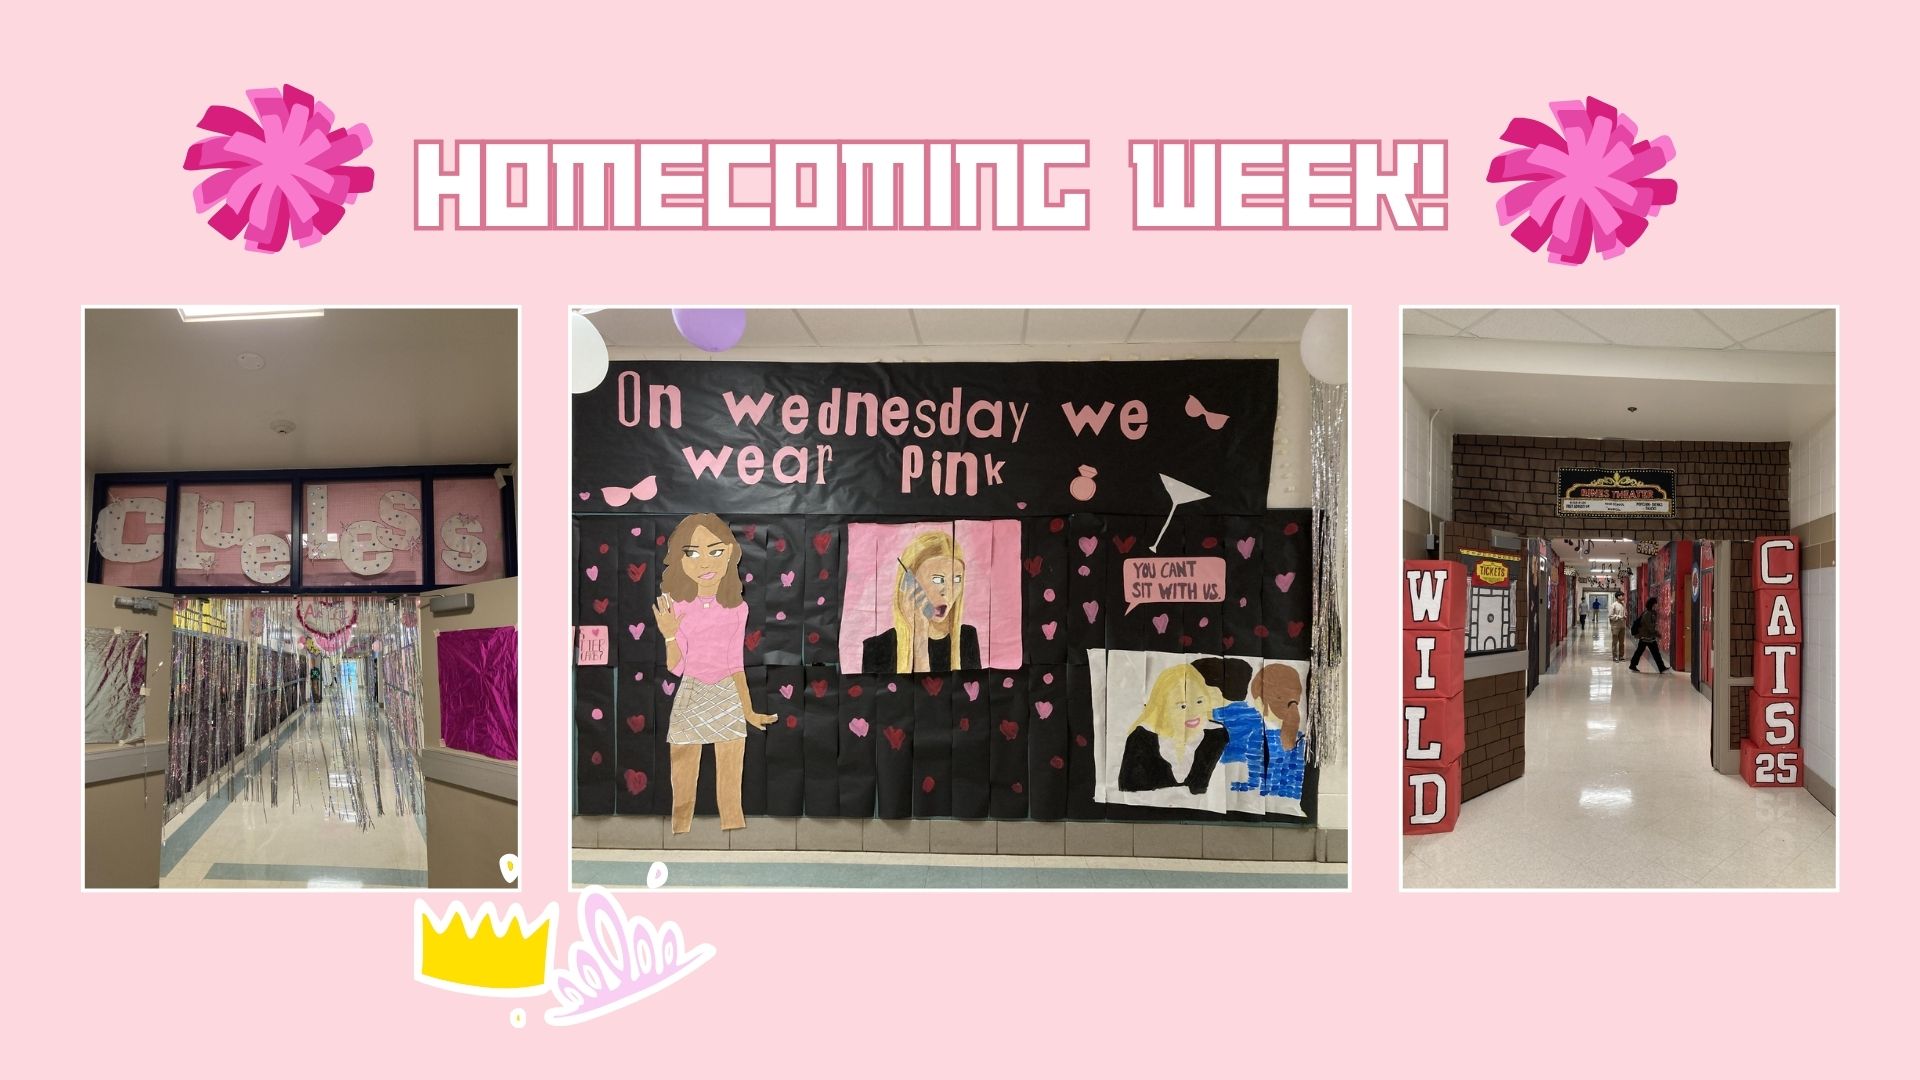 Homecoming decorations done by grade levels for the competition of best decorated halls. 